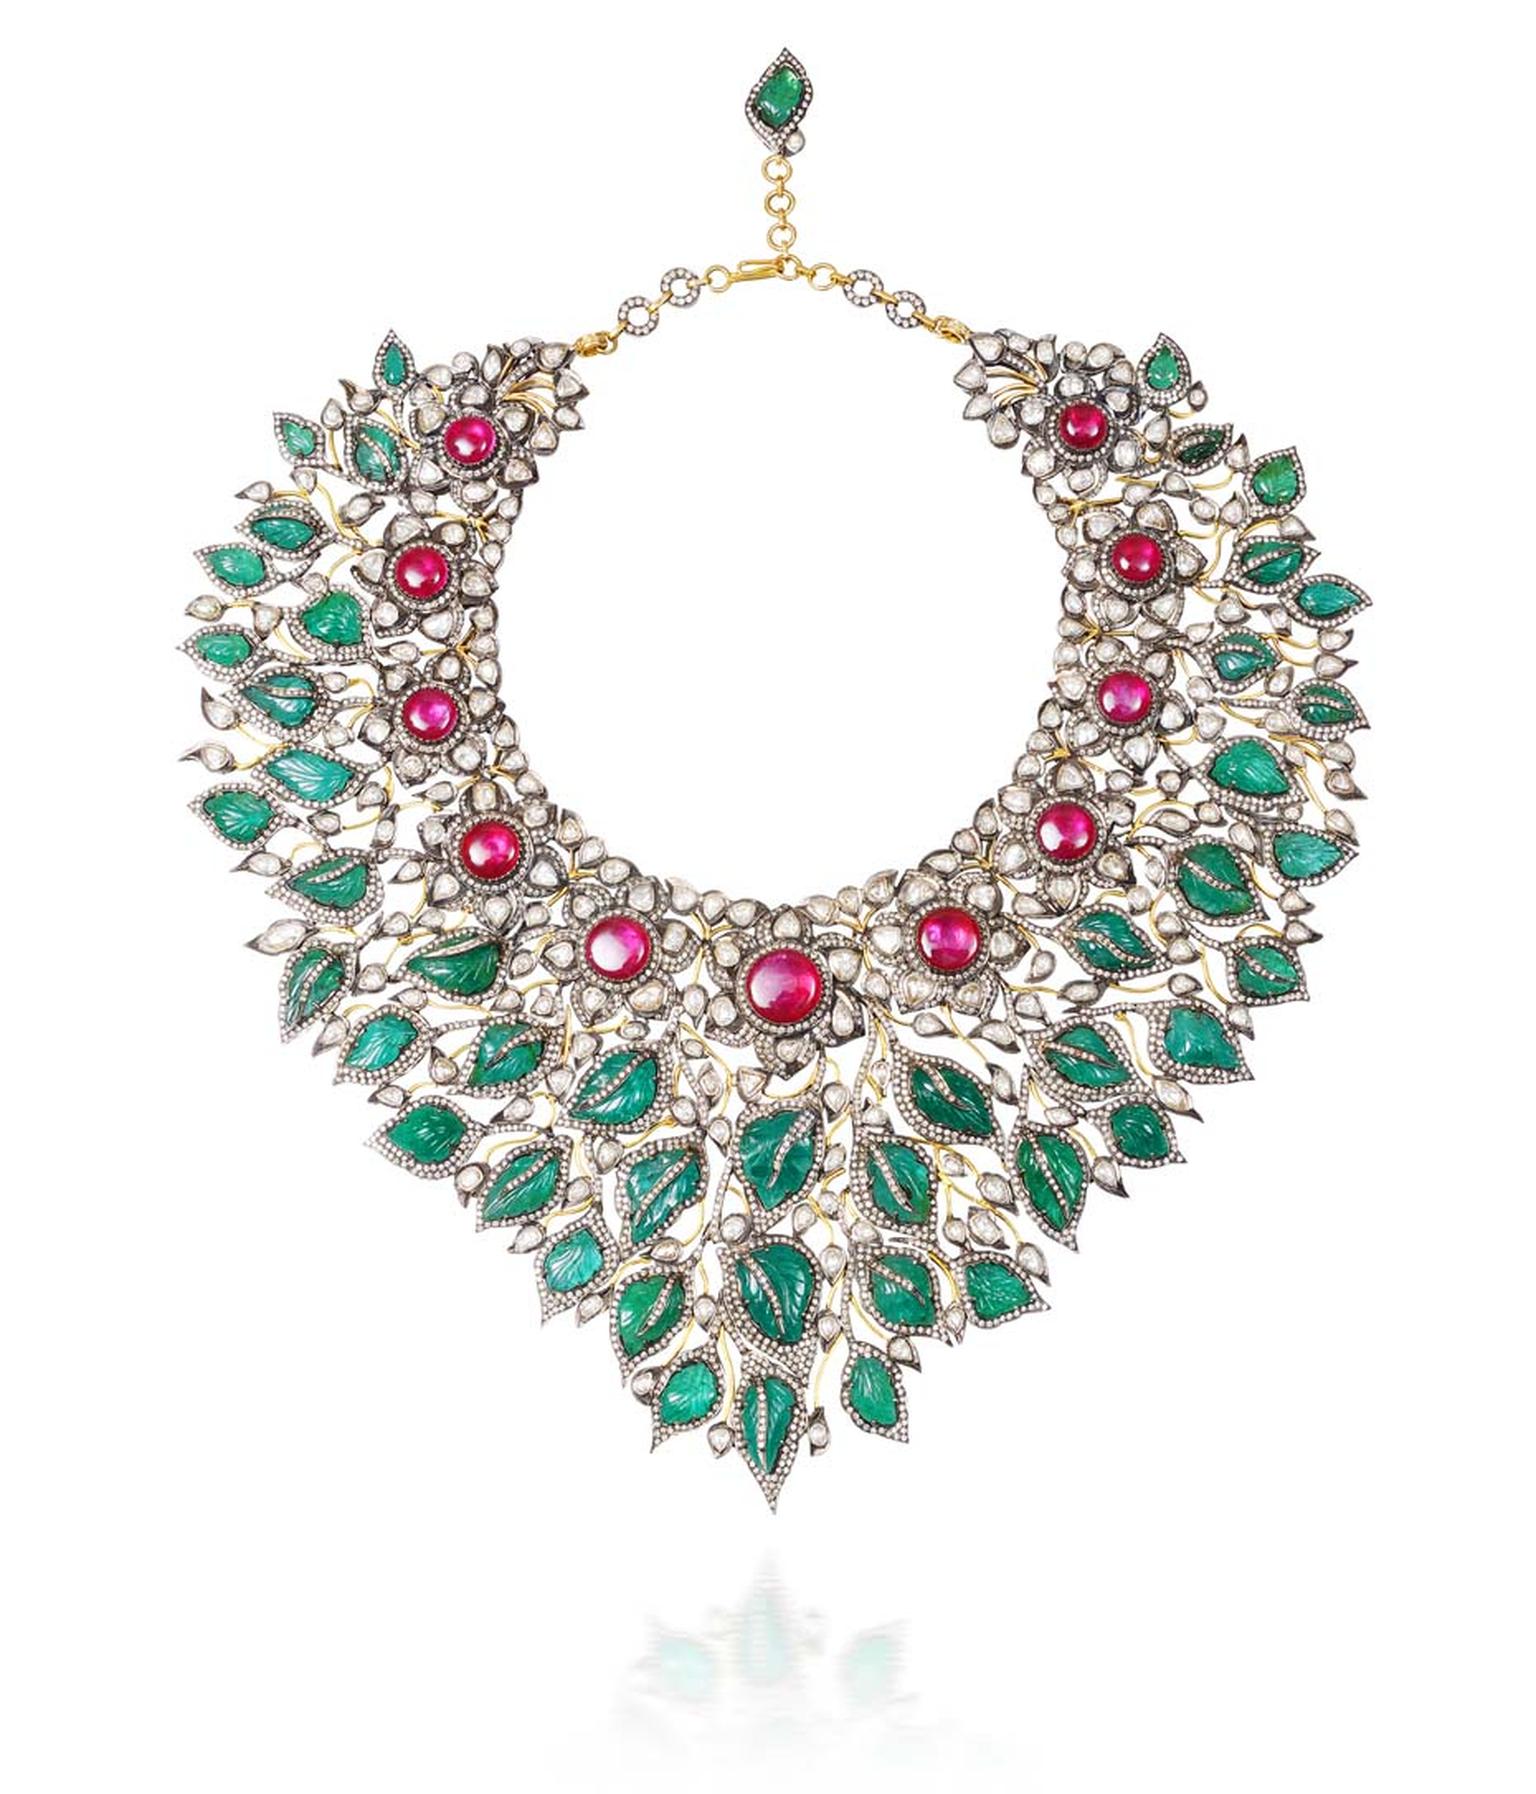 Amrapali neckpiece or "Sadabahar", made for Project Blossoming using Gemfields Zambian emeralds and rubies from Mozambique.